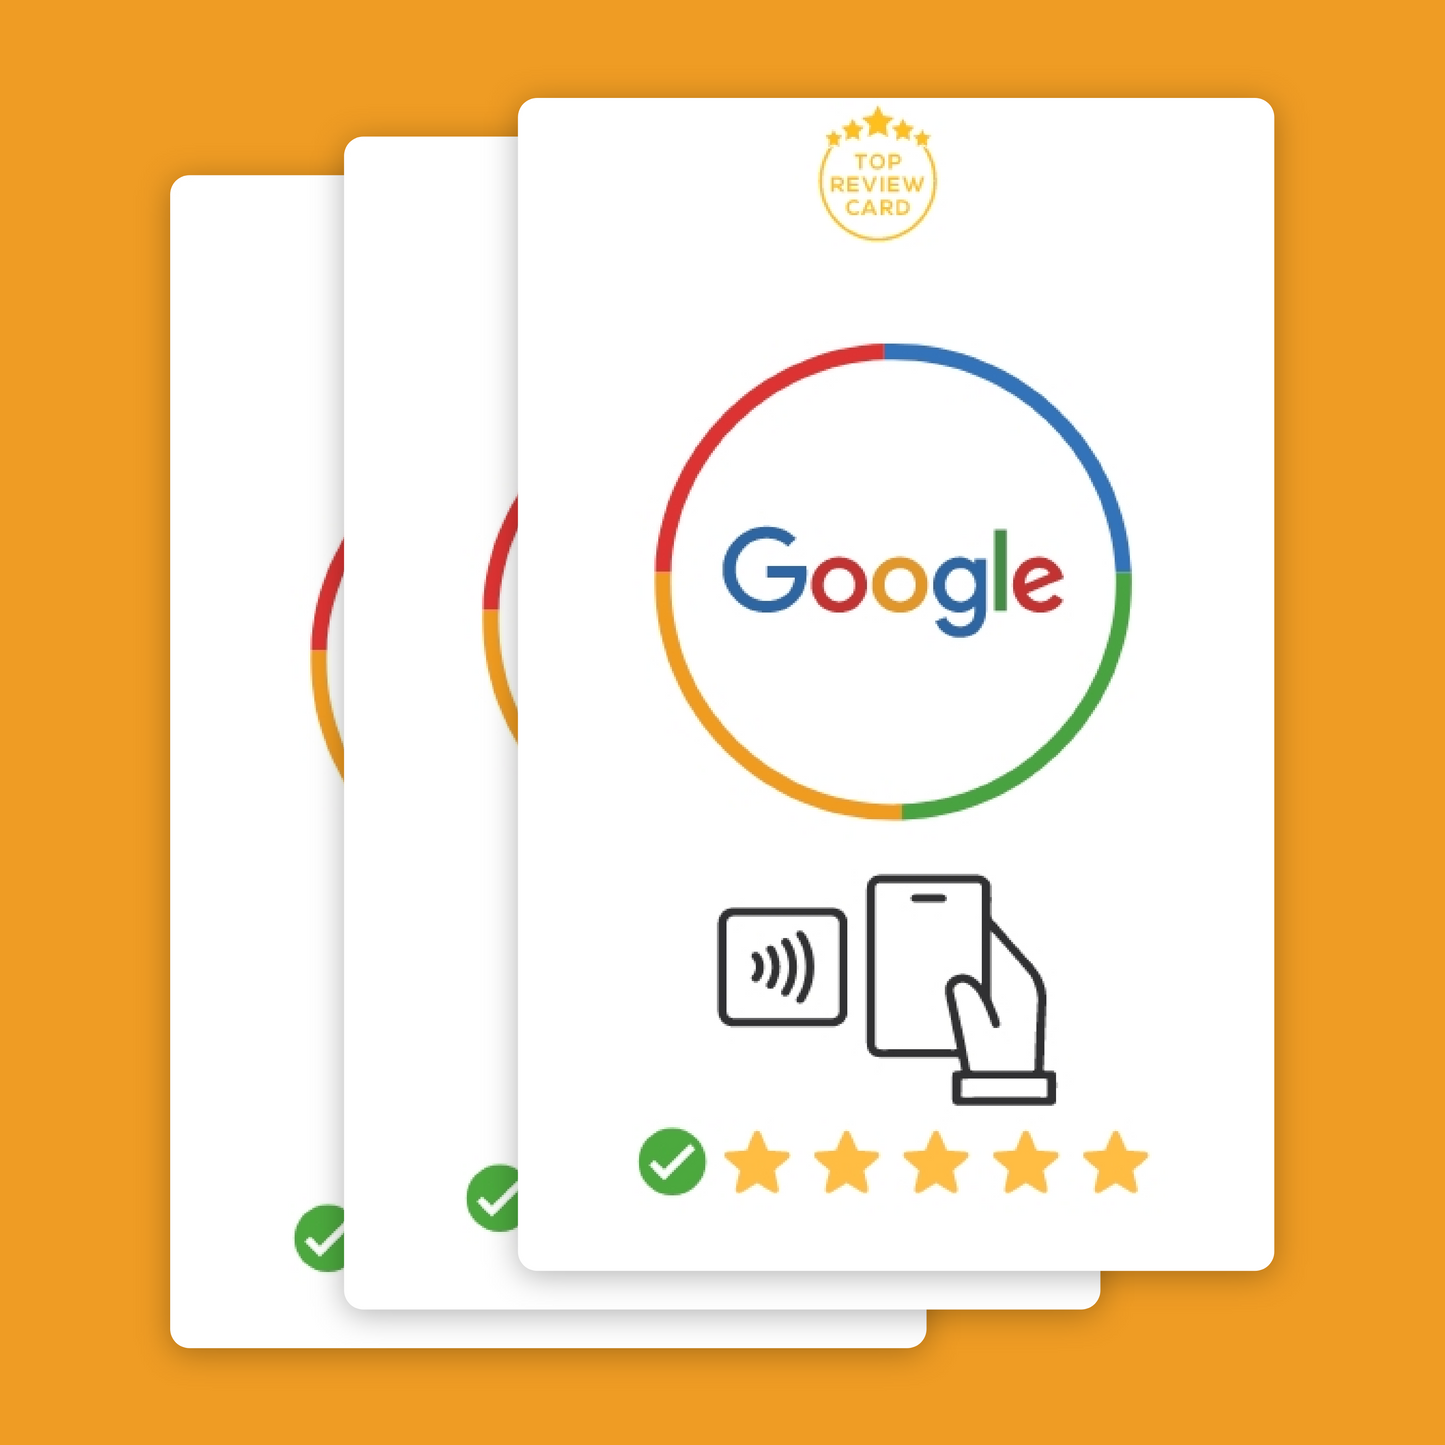  Crafted for Credibility Build trust from the moment customers land on your page with our Google Review Cards. Crafted for credibility, each card is a beacon of authenticity in a sea of online noise.